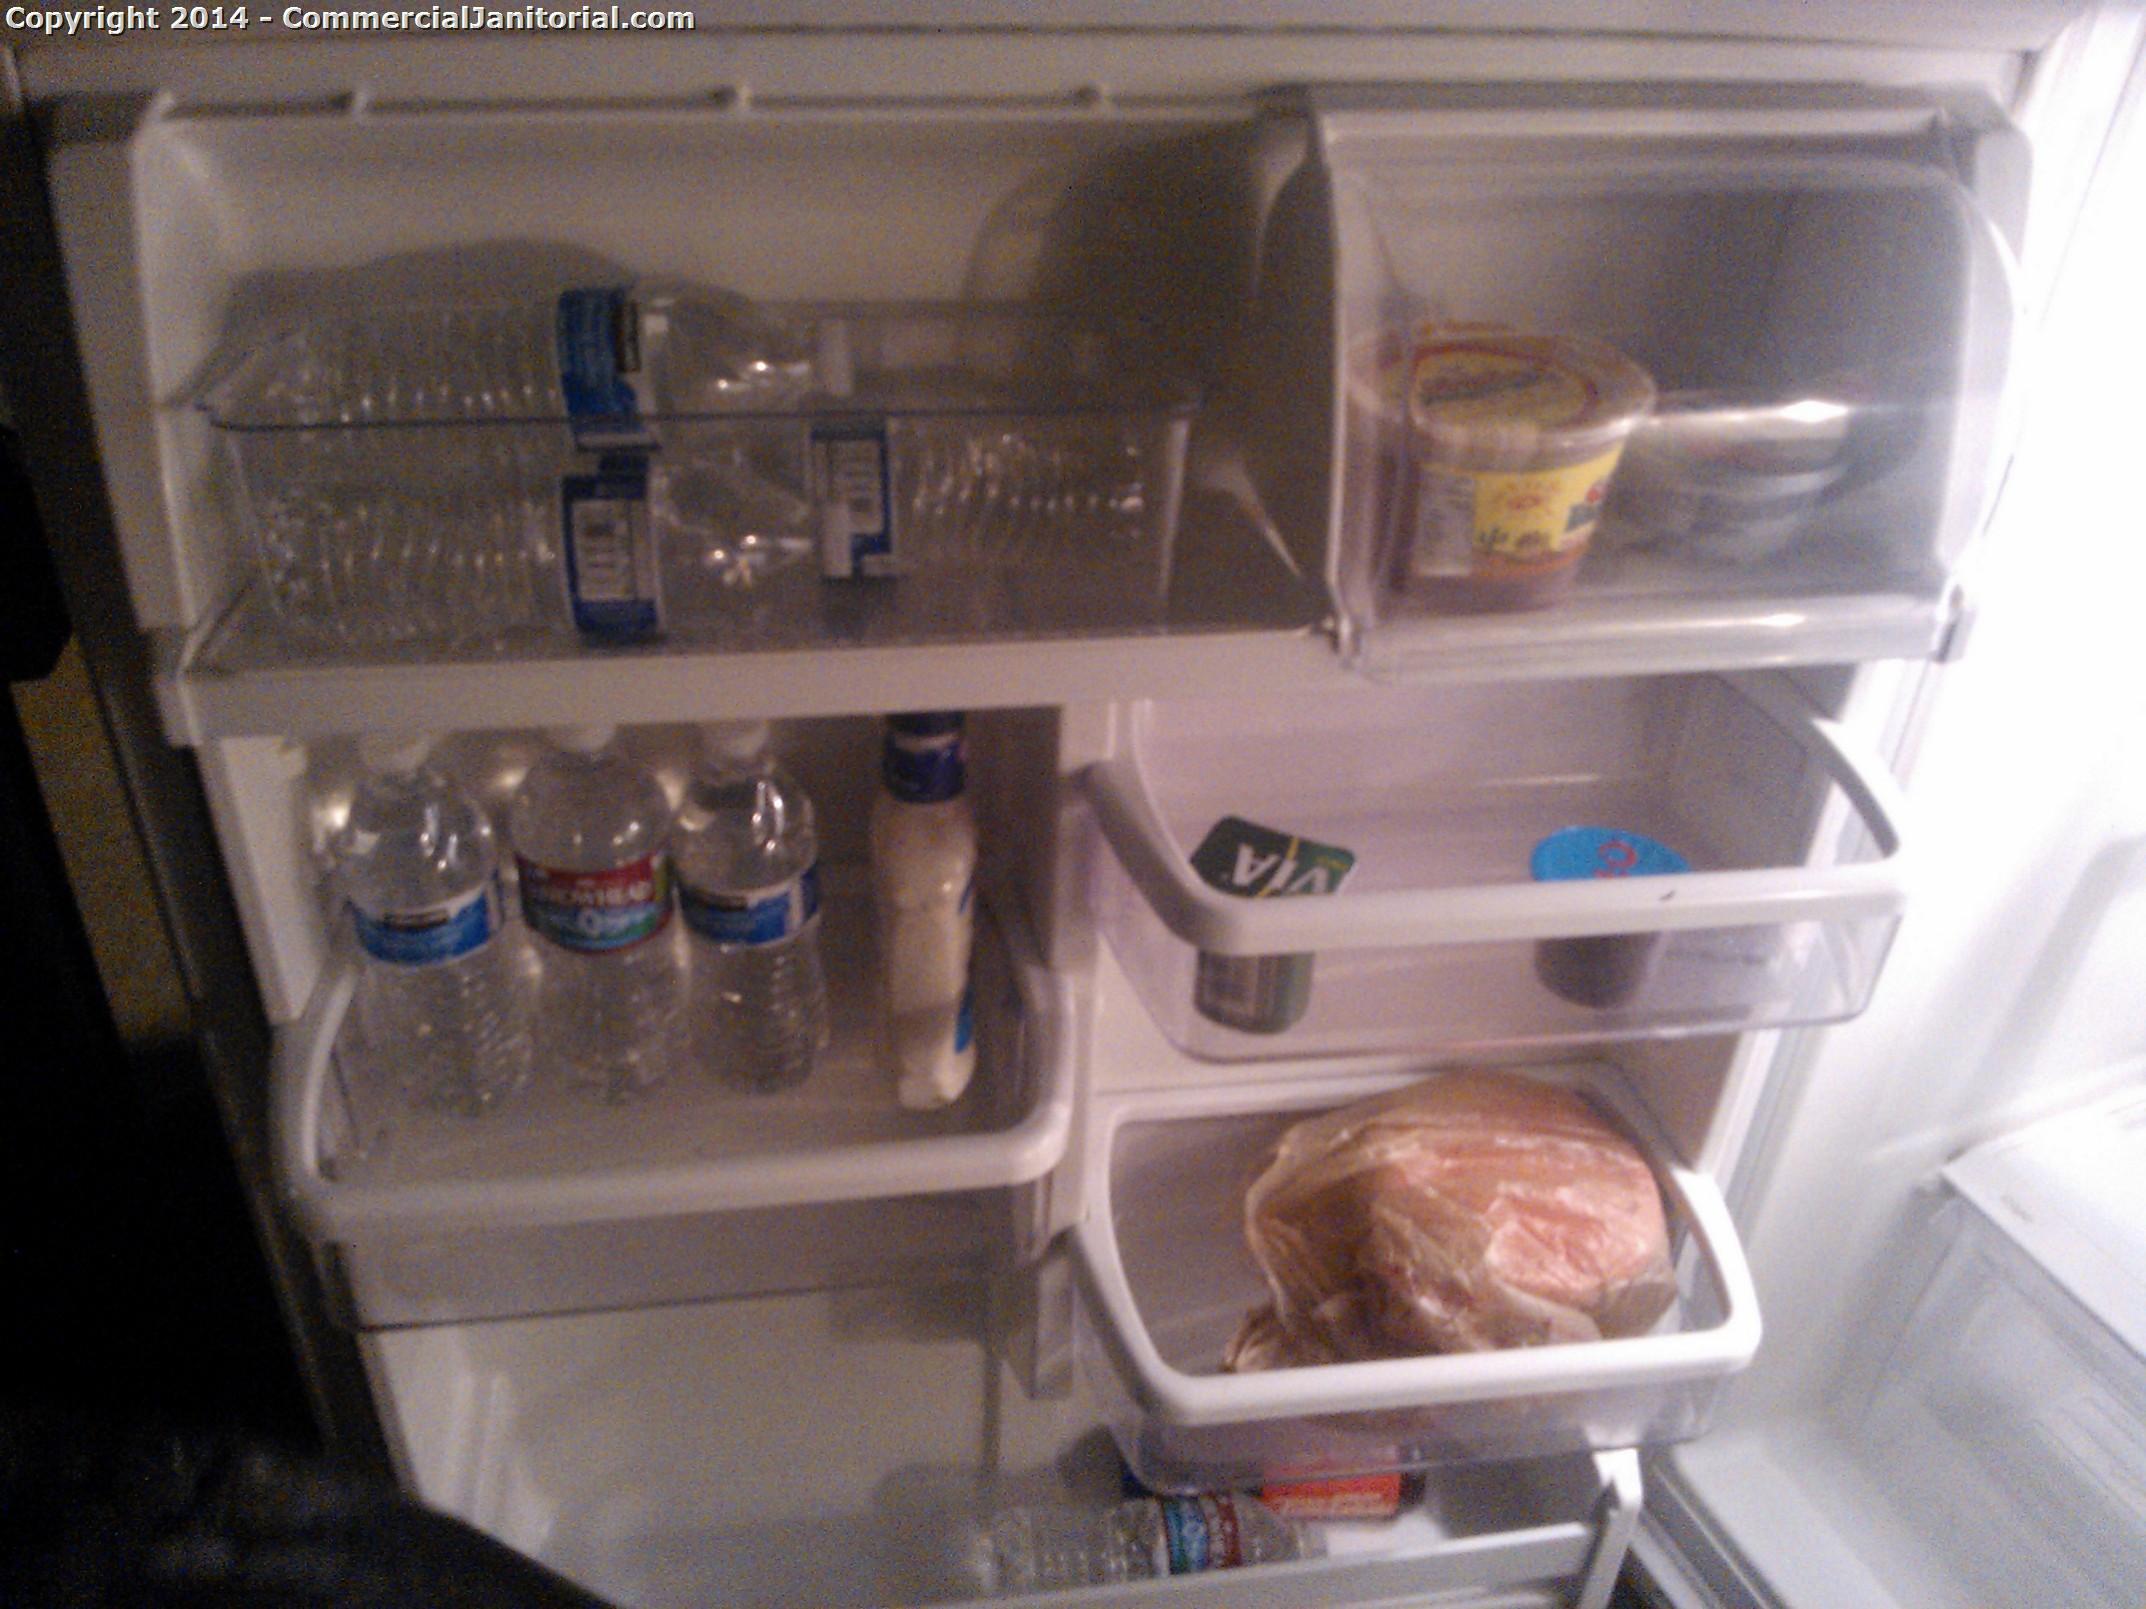 interior refrigerator as part of nightly janitorial service - we usually do this one time per month